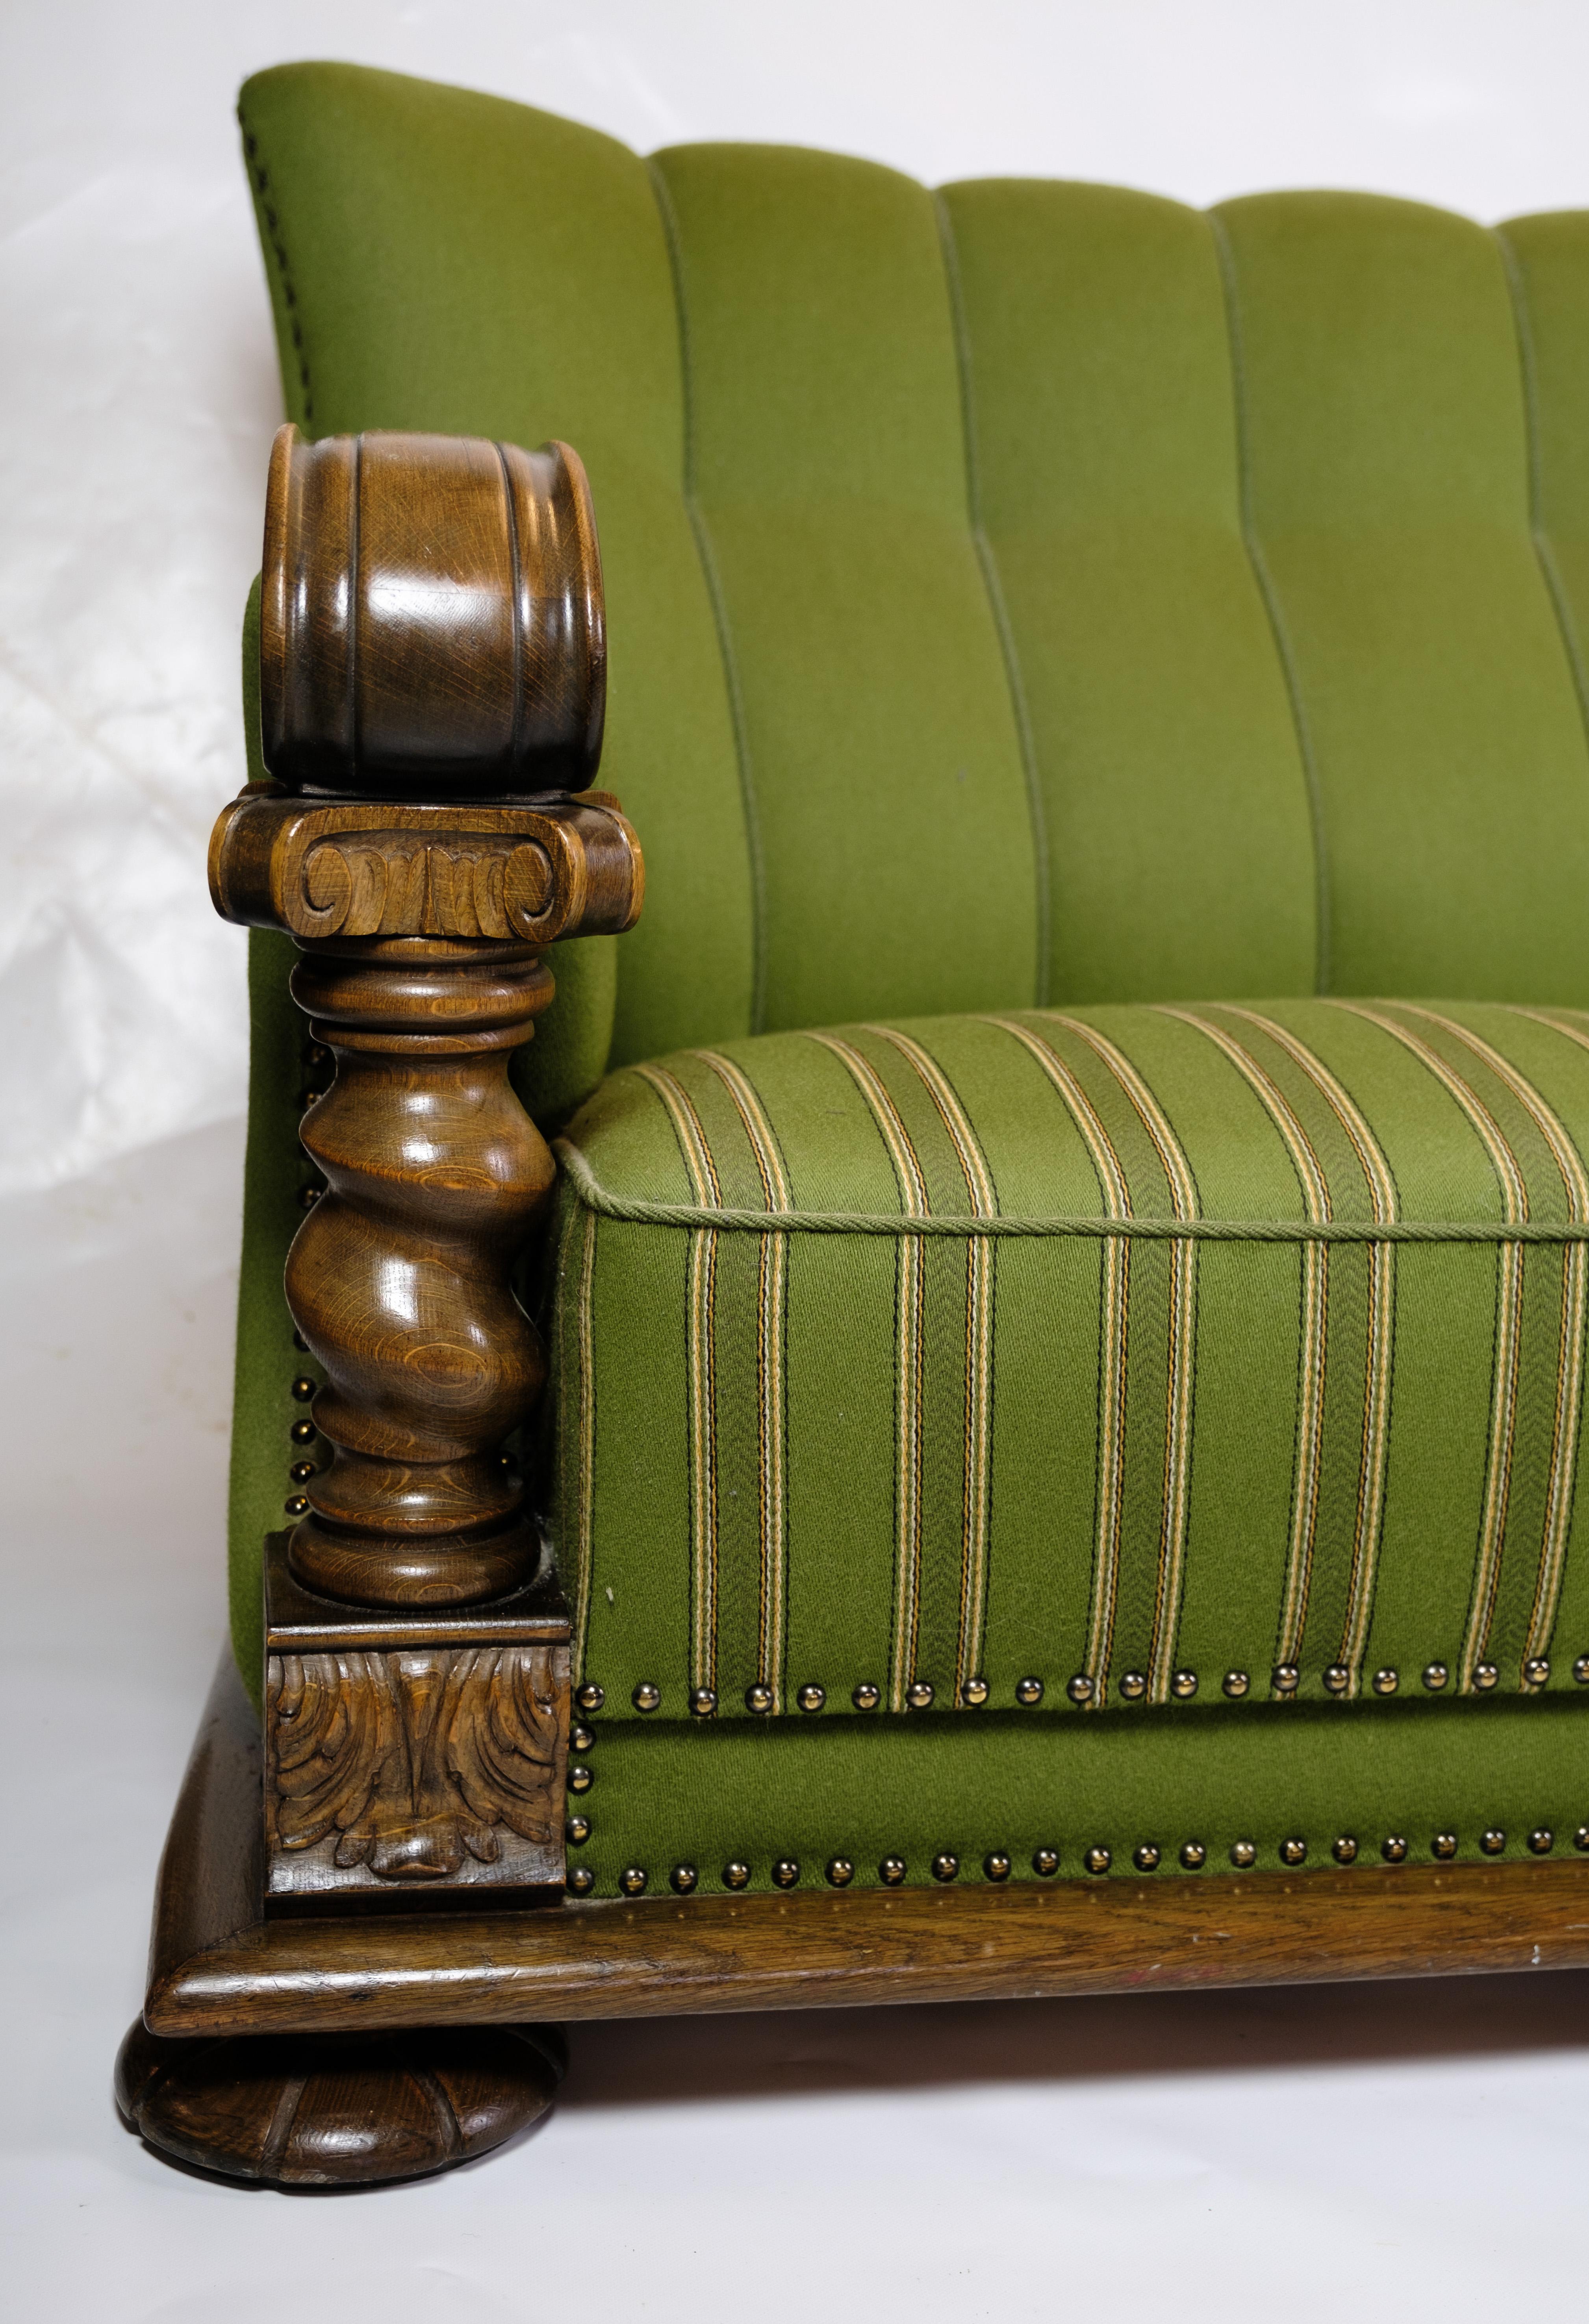 Renaissance Sofa in Green fabric with Wood Carvings from 1920s.